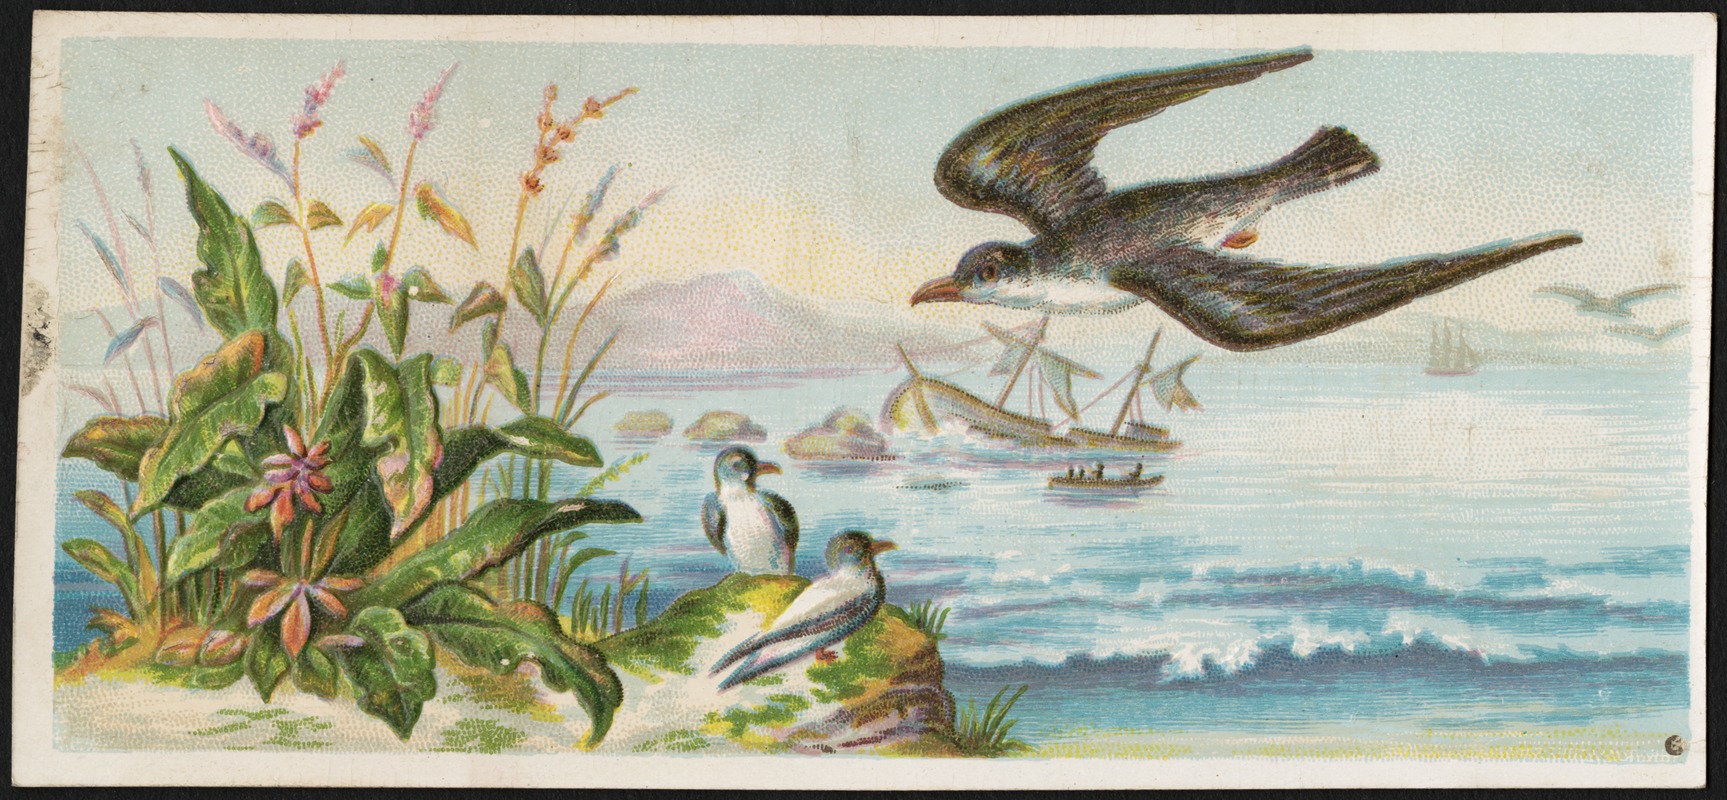 Bird flying over water, plants and sitting bird in the foreground, boats in the background.